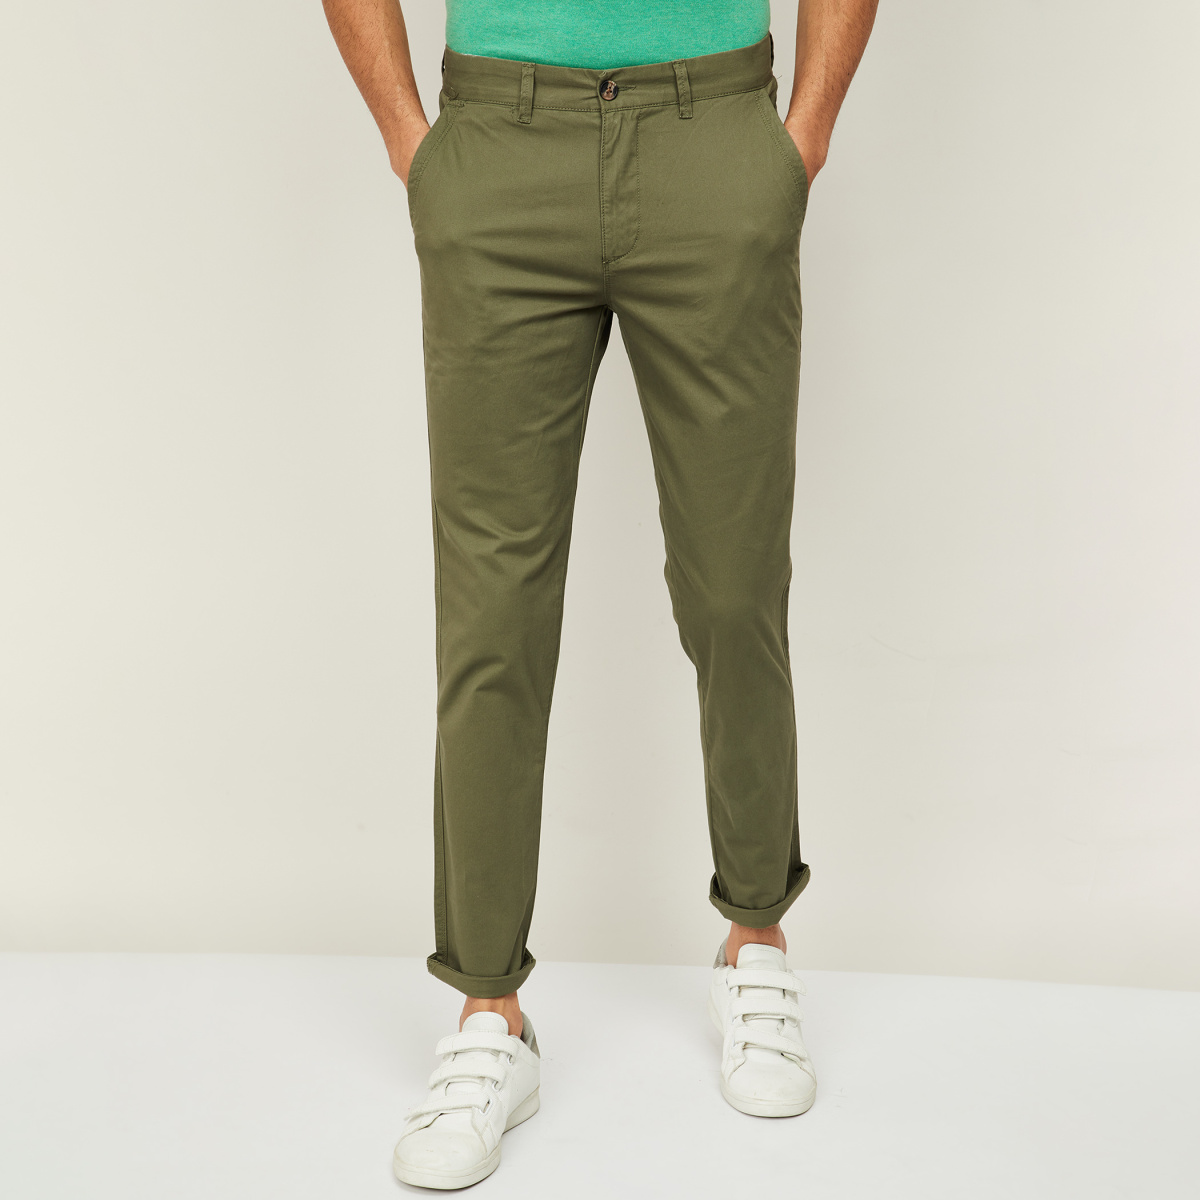 UNITED COLORS OF BENETTON Men Solid Slim Tapered Casual Trousers